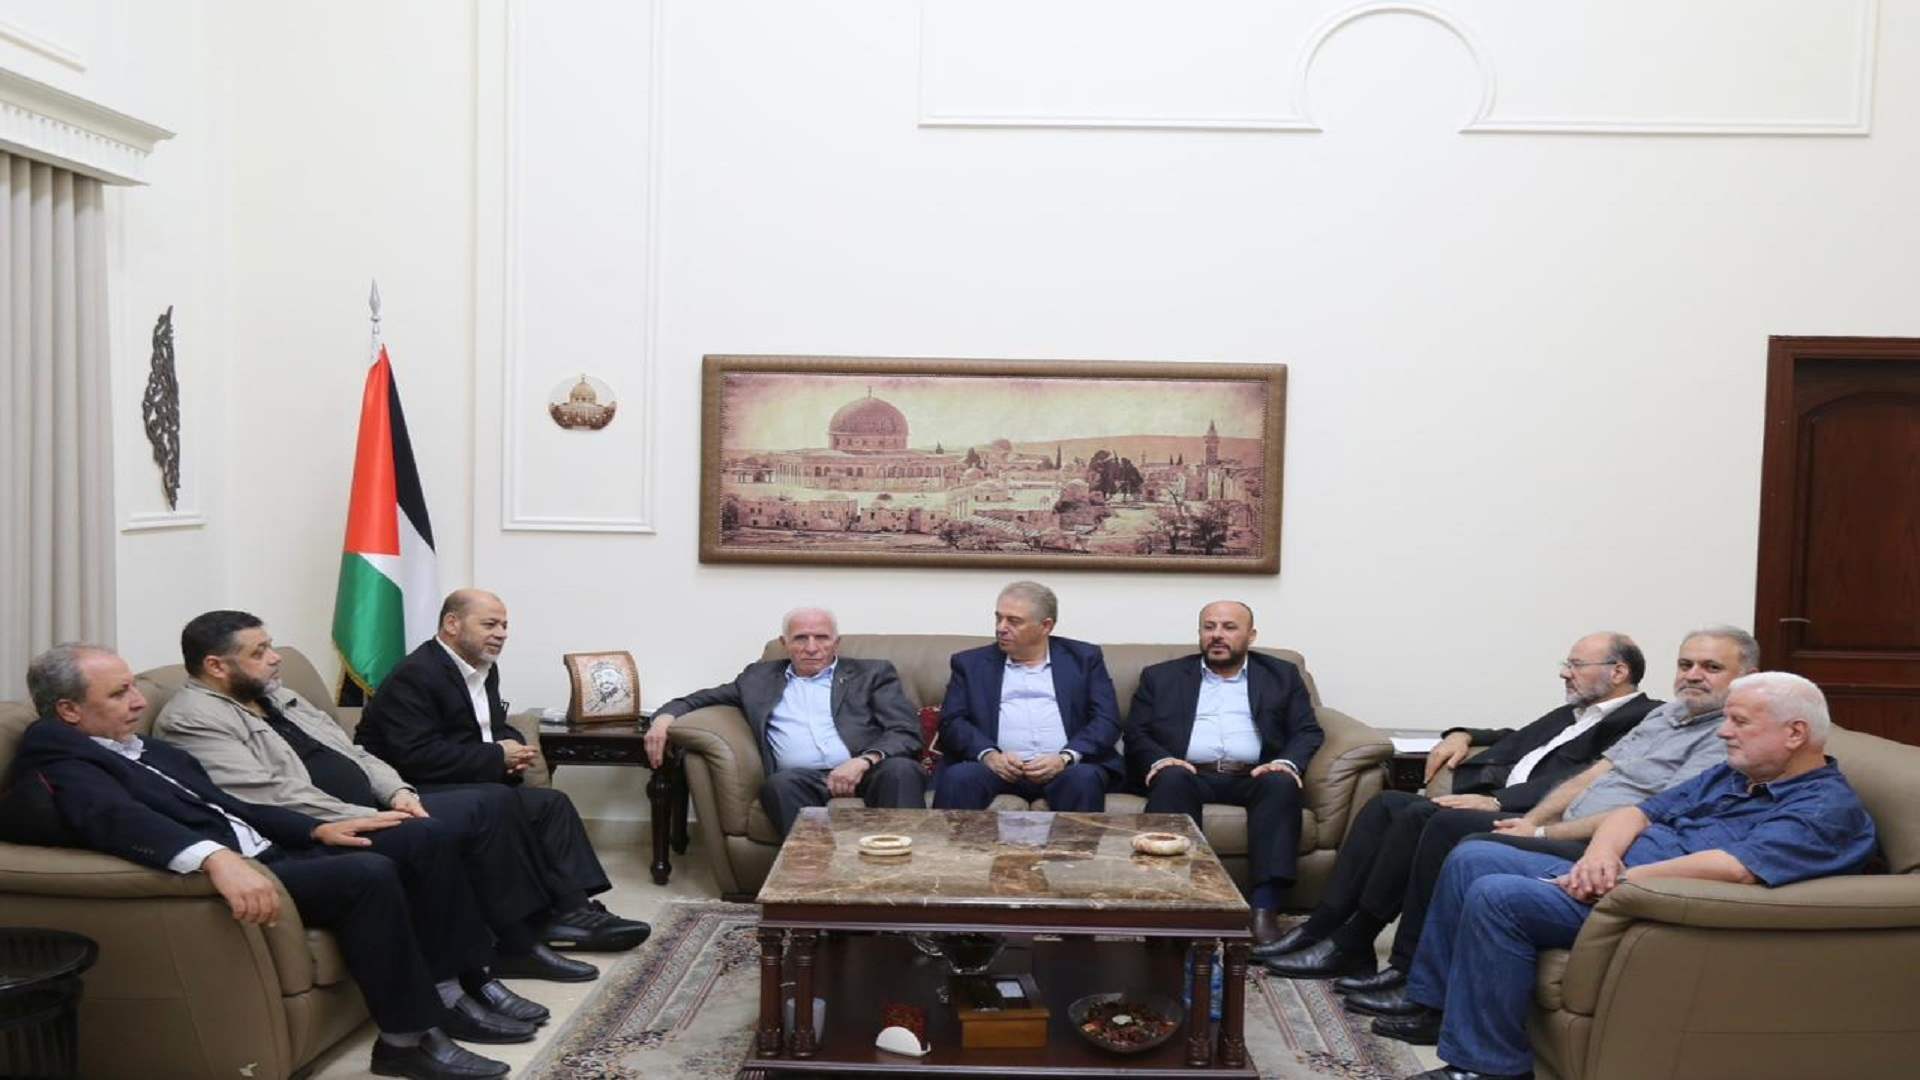 Fatah and Hamas Issue Joint Statement Following Meeting at Palestinian Embassy in Beirut